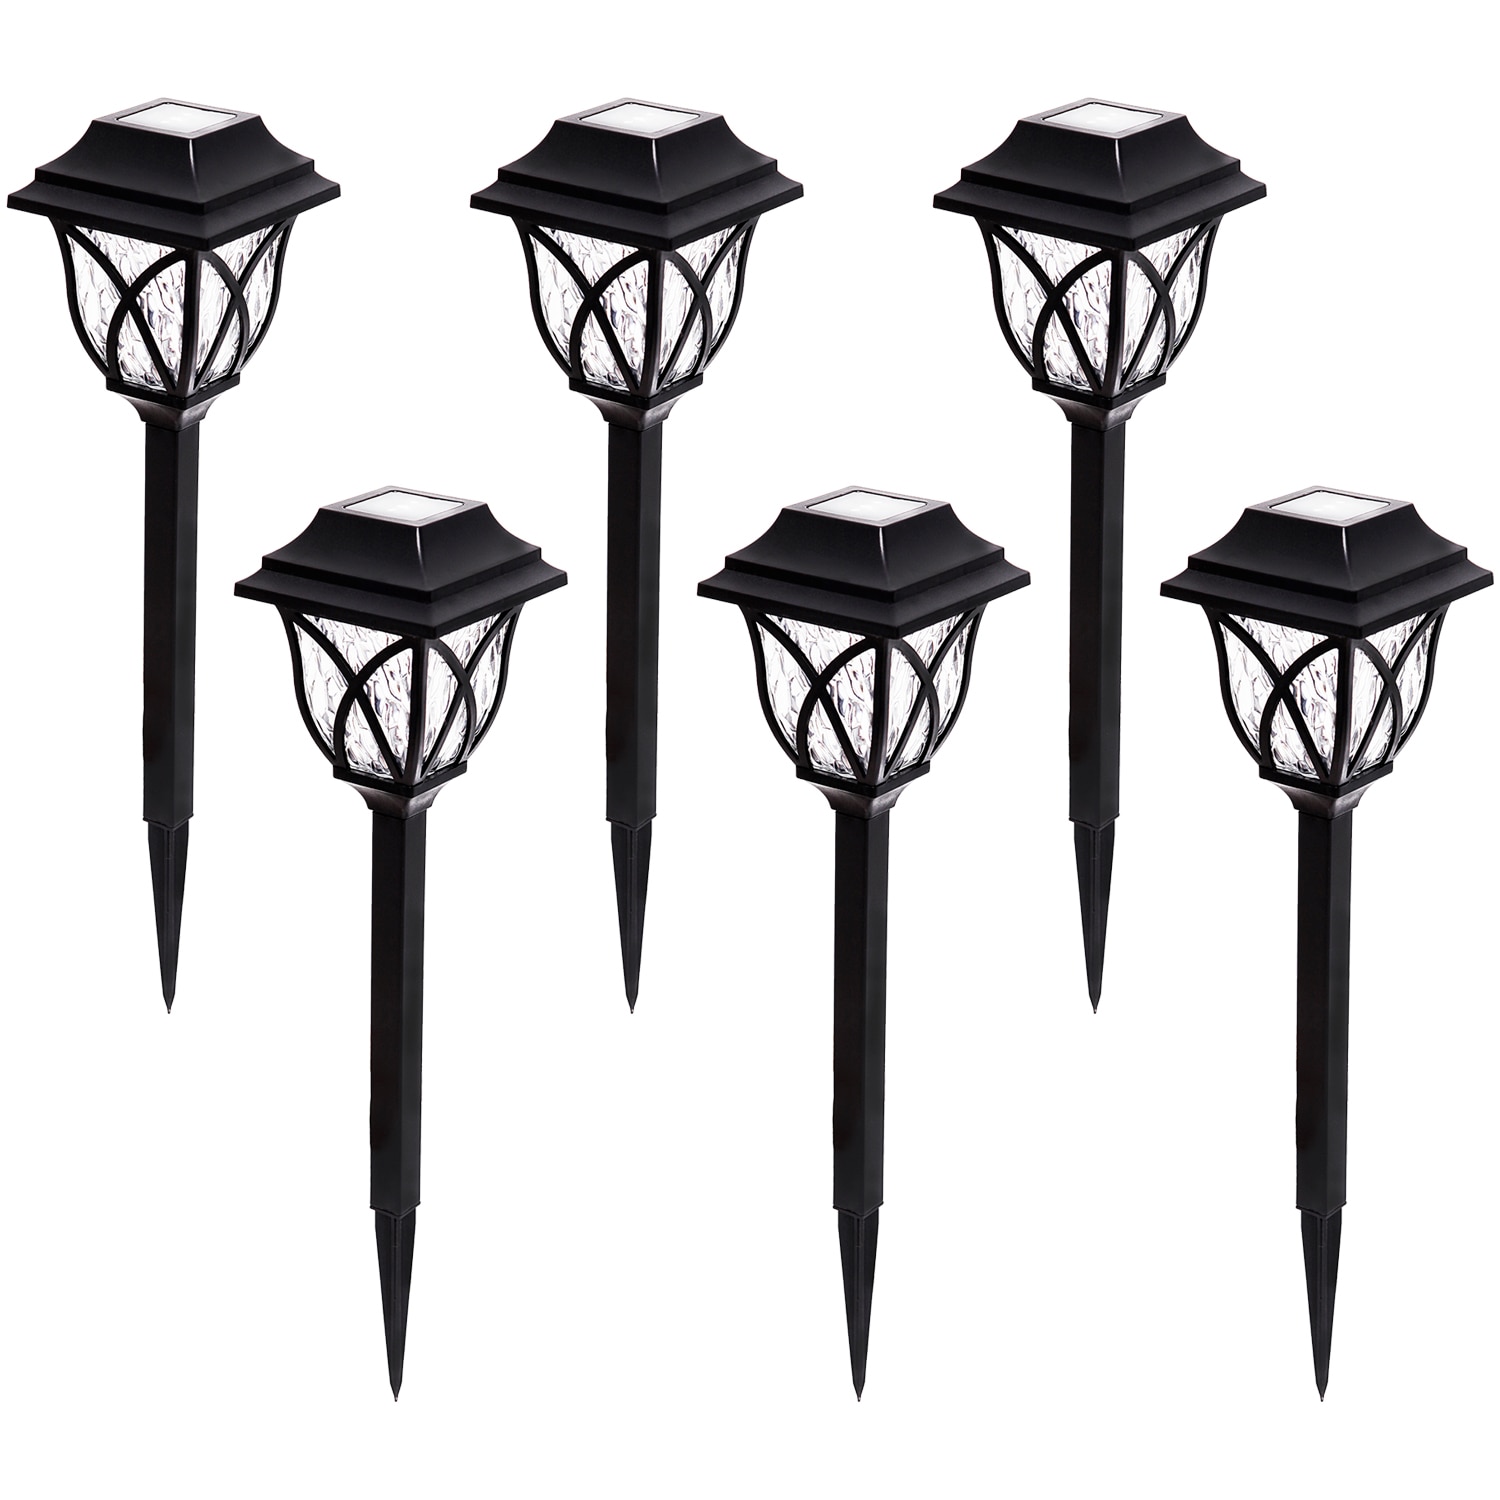 6 pack Harbor Breeze 5-Lumen Black Solar LED Outdoor Path Light Kits, $13.99, 8 pack stainless lights, $27.99, free pickup, Lowe's, today only